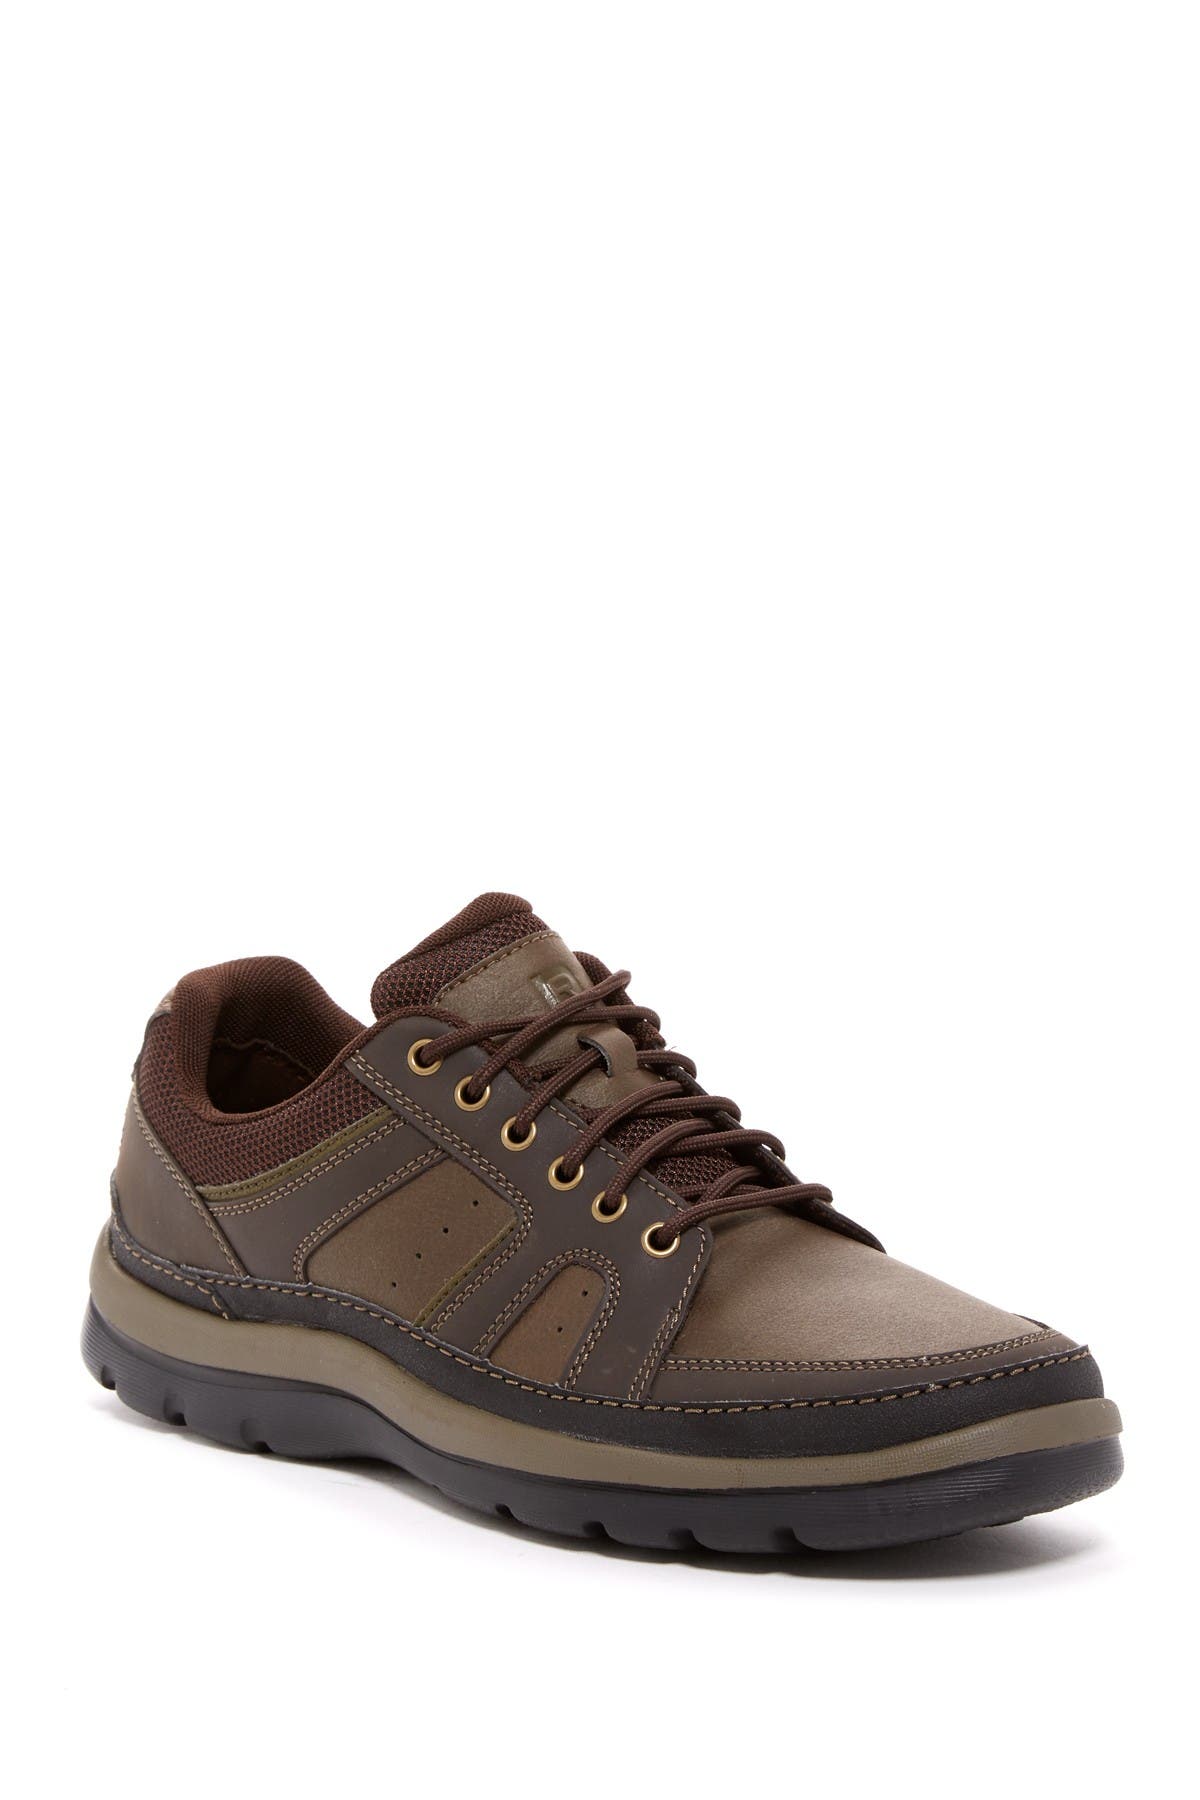 Rockport | Get Your Kicks Lace-Up 